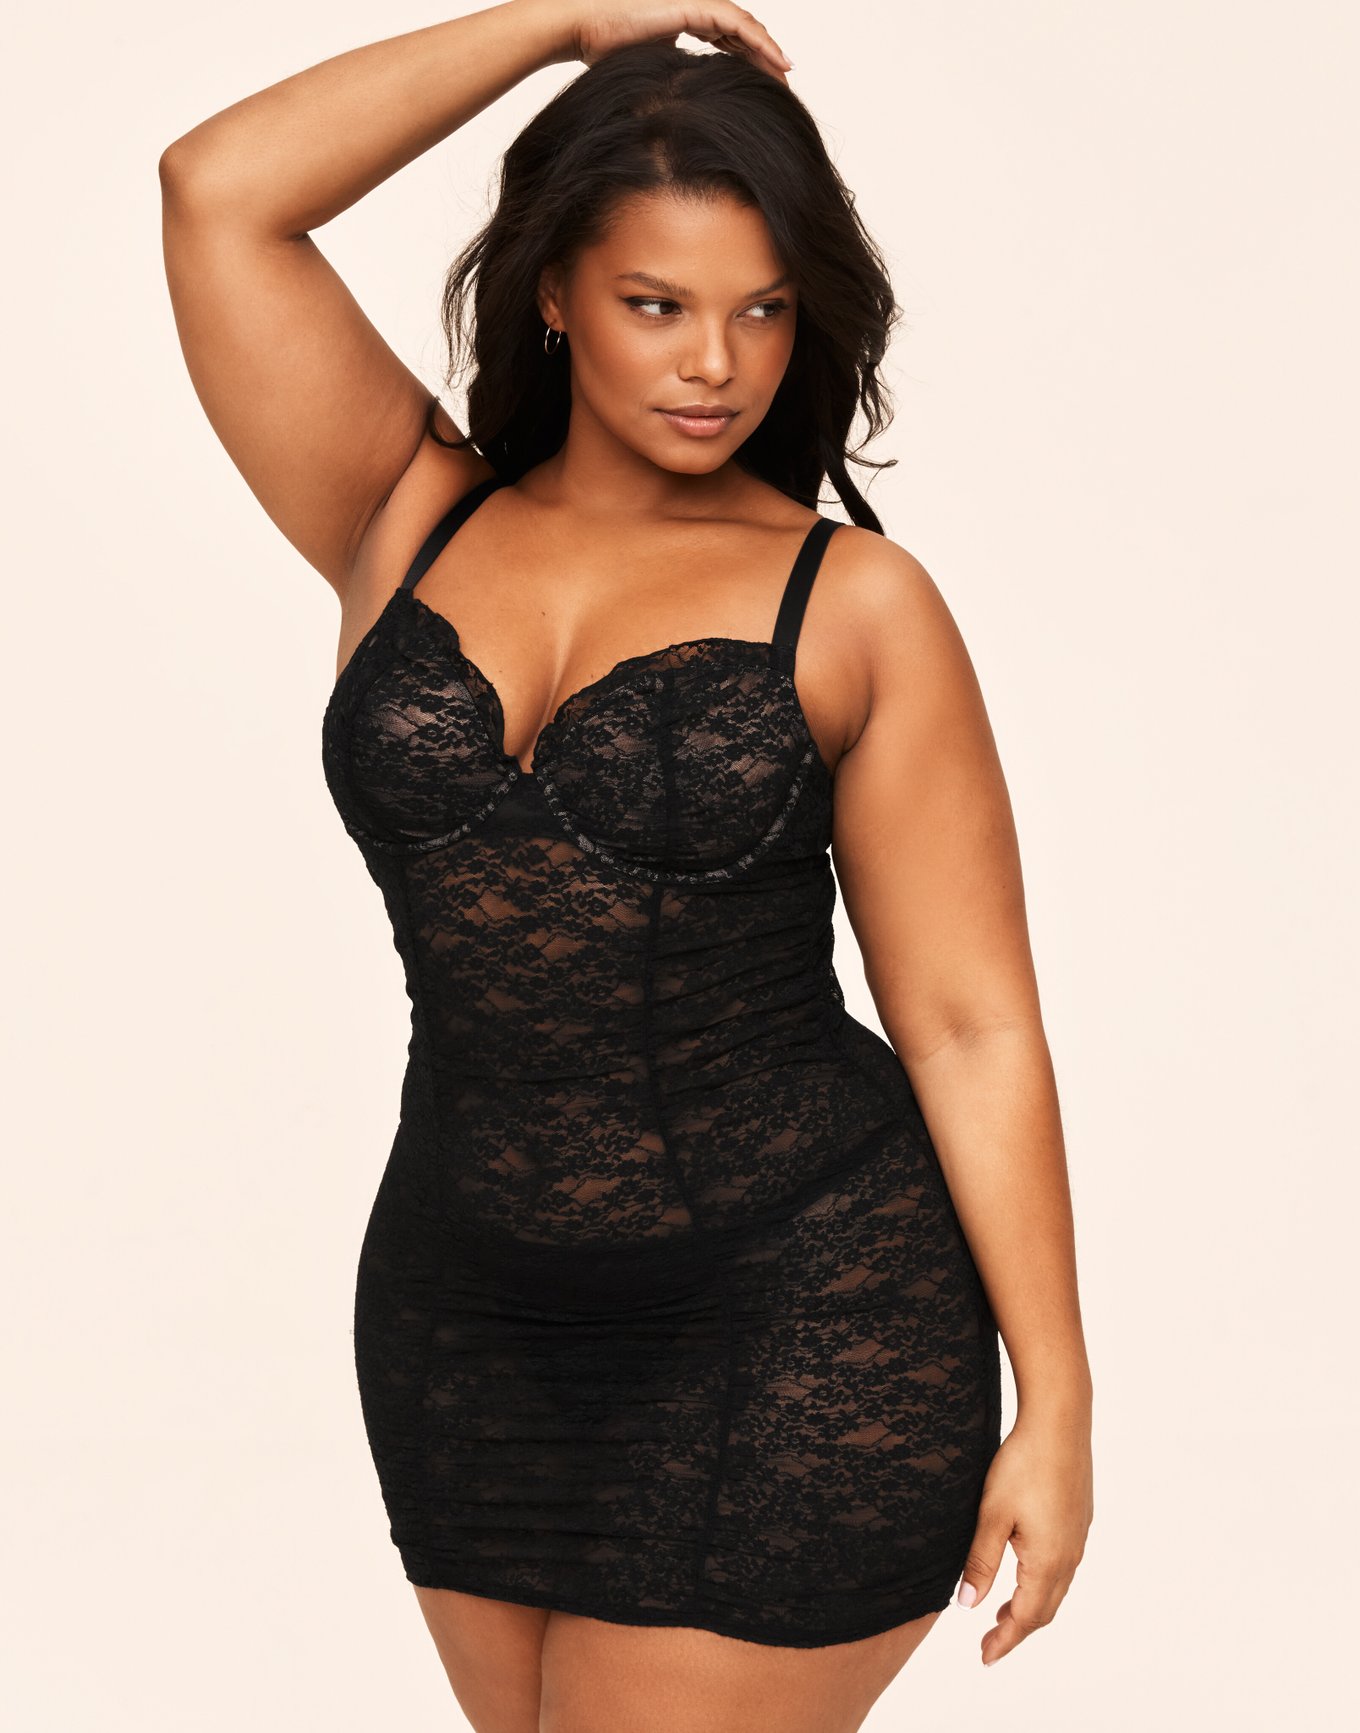 Lingerie brand drops 'plus-size' label in favour of 'extended